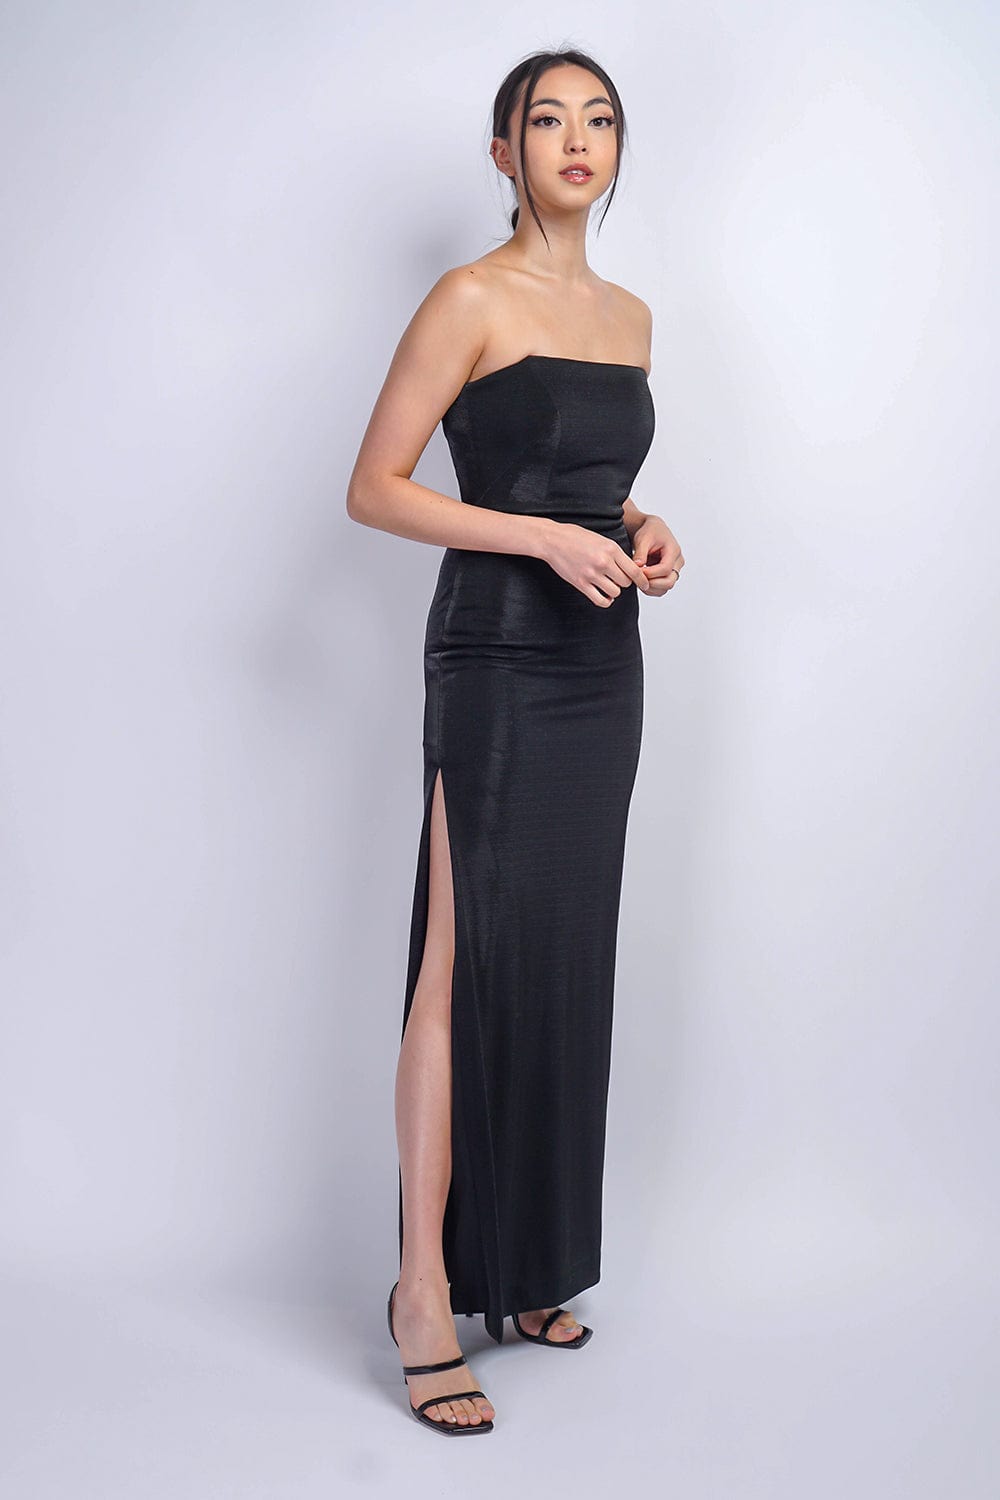 GOWNS Black Luxe Sheen Strapless Gown - Chloe Dao